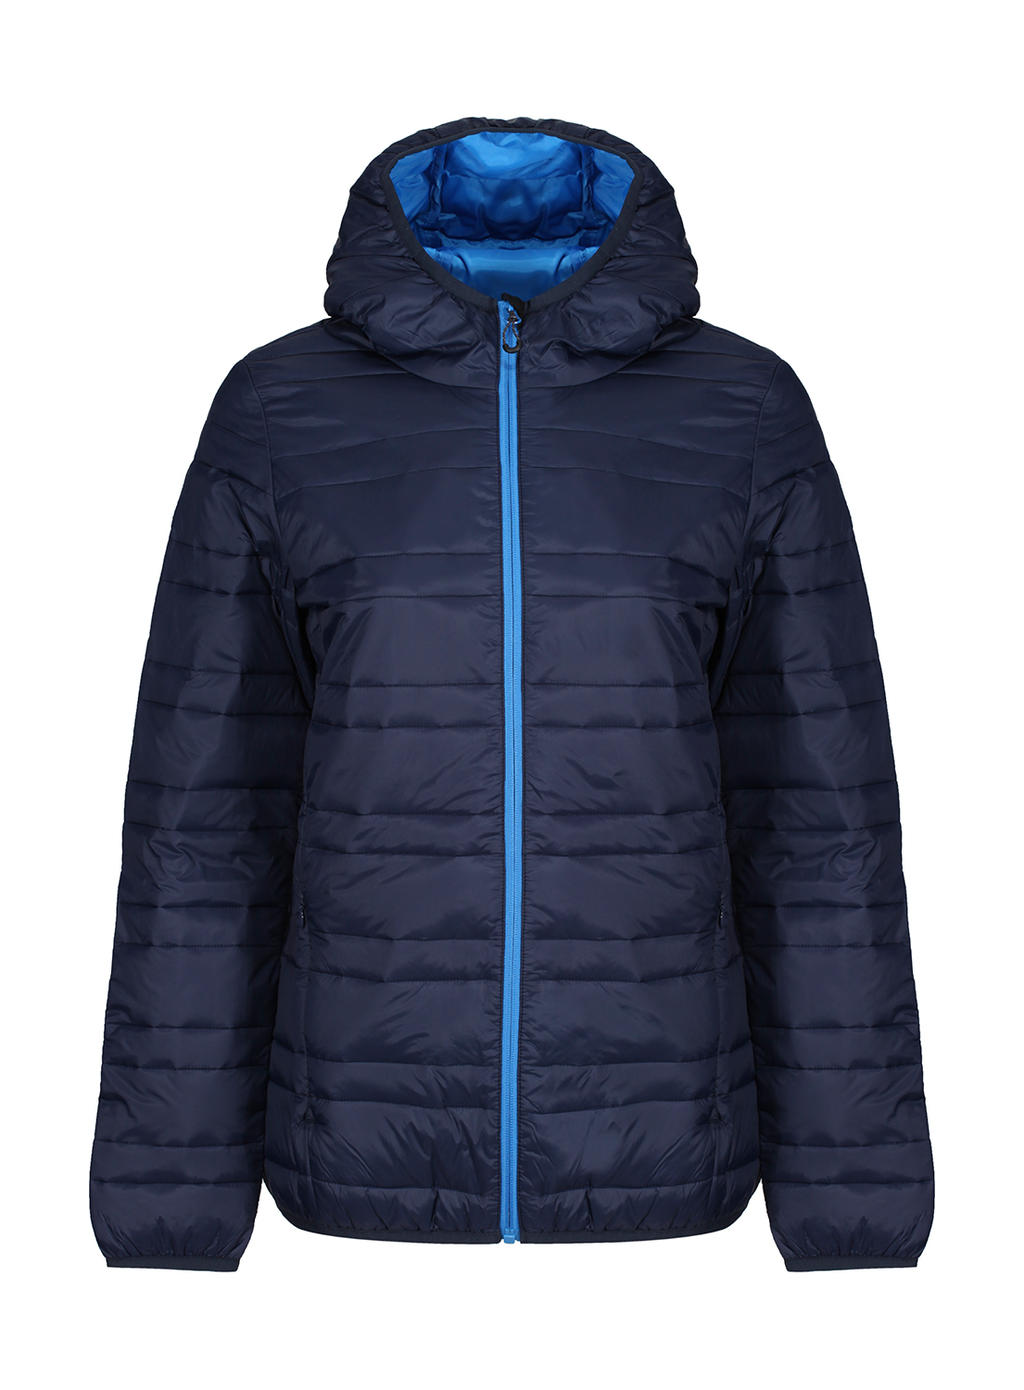  Womens Hooded Firedown Baffle Jacket in Farbe Navy/French Blue